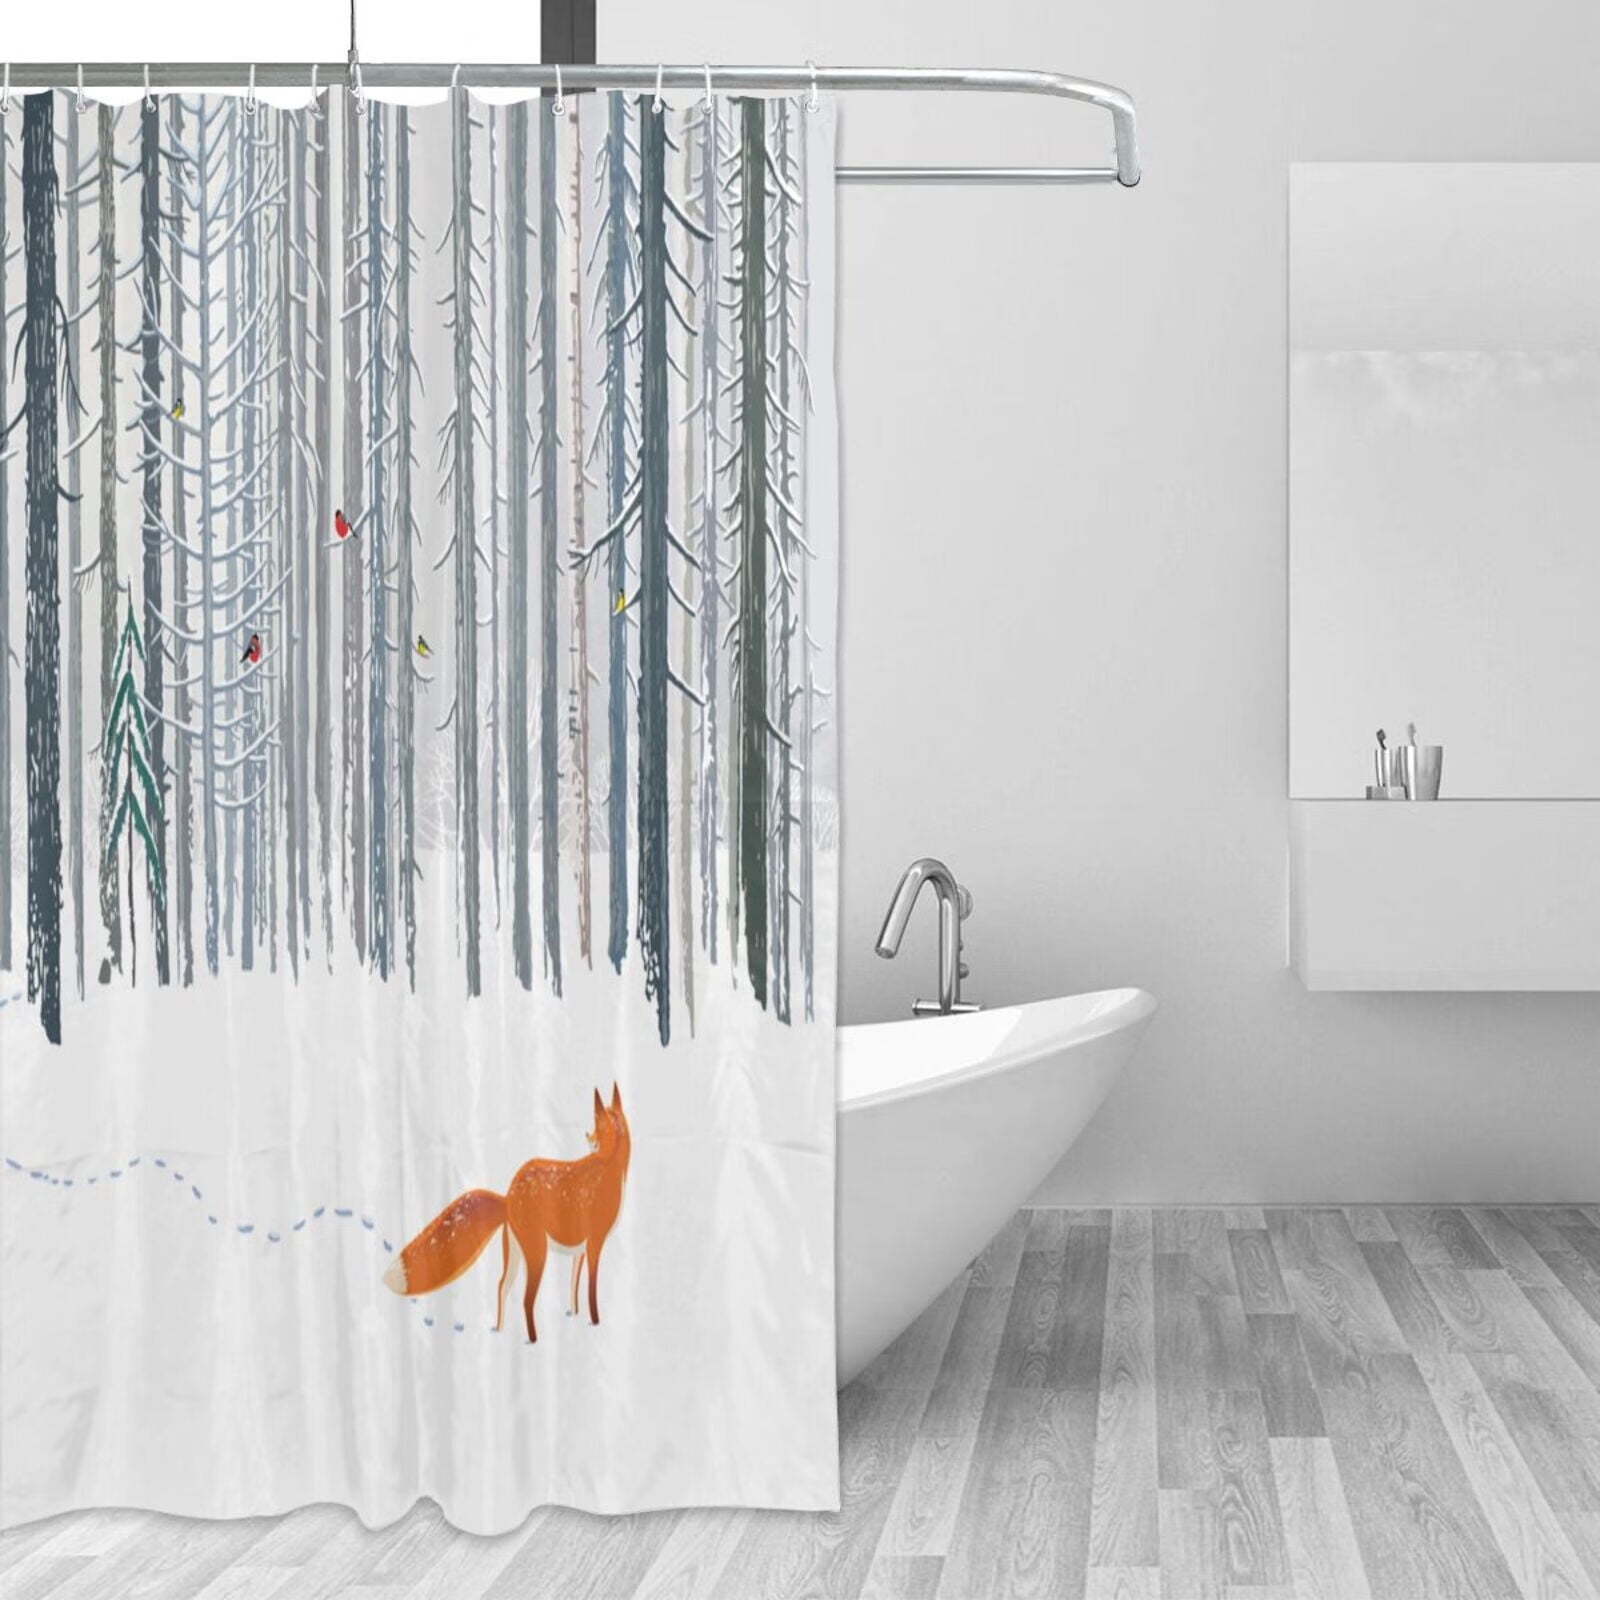 JOOCAR Winter Forest Shower Curtain for Bathroom, Snow Covered Pine Trees  Winter Season Animal Red Fox and Cardinals Idyllic Seasonal Scenery Fabric  Shower Curtain 72 Wx72 L Inches 